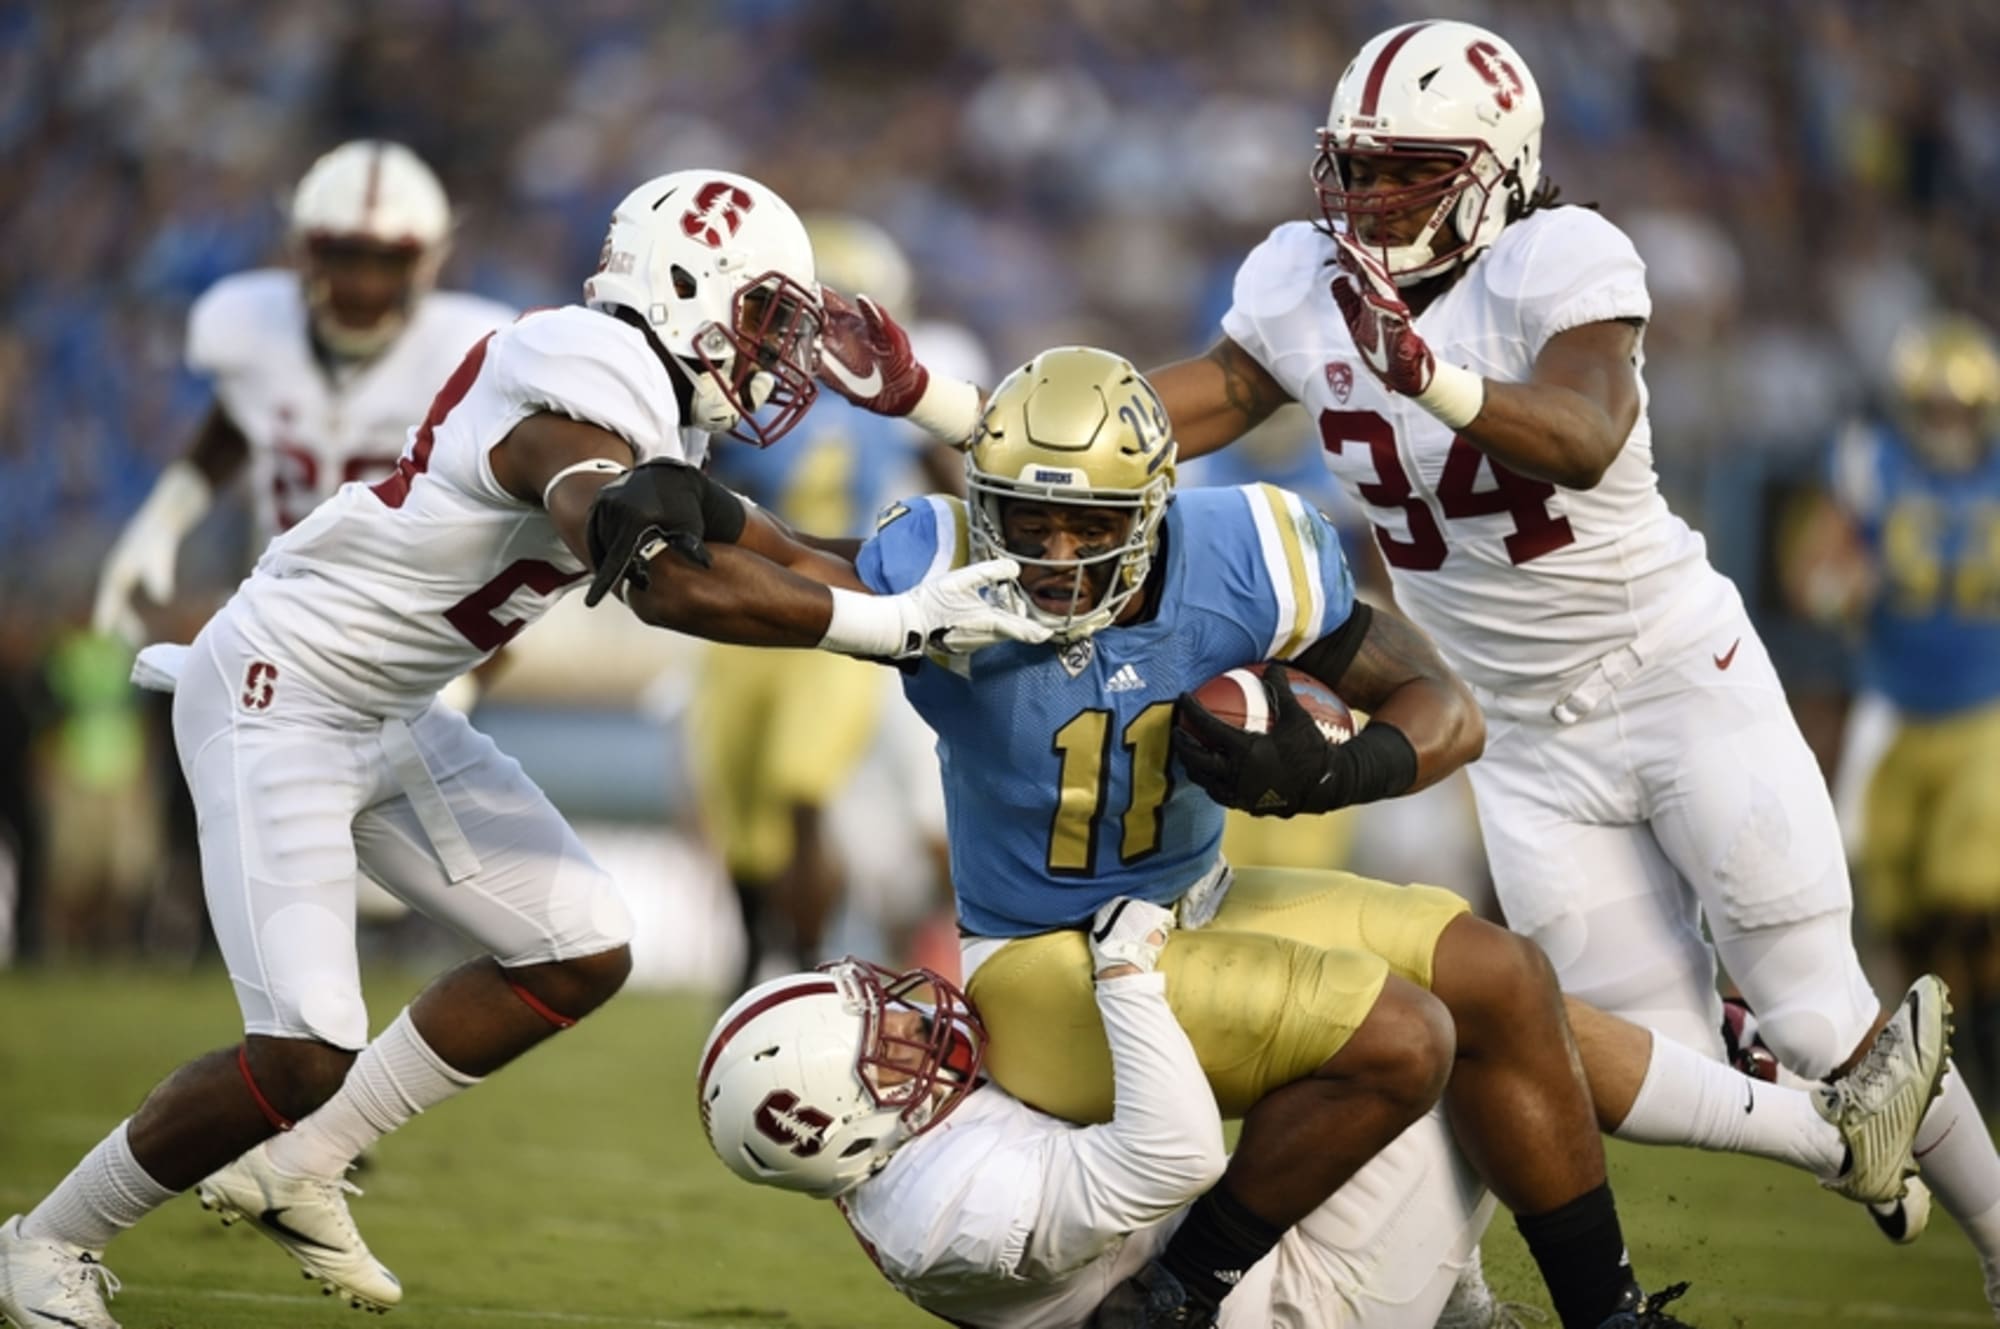 UCLA vs Stanford Highlights, score and recap